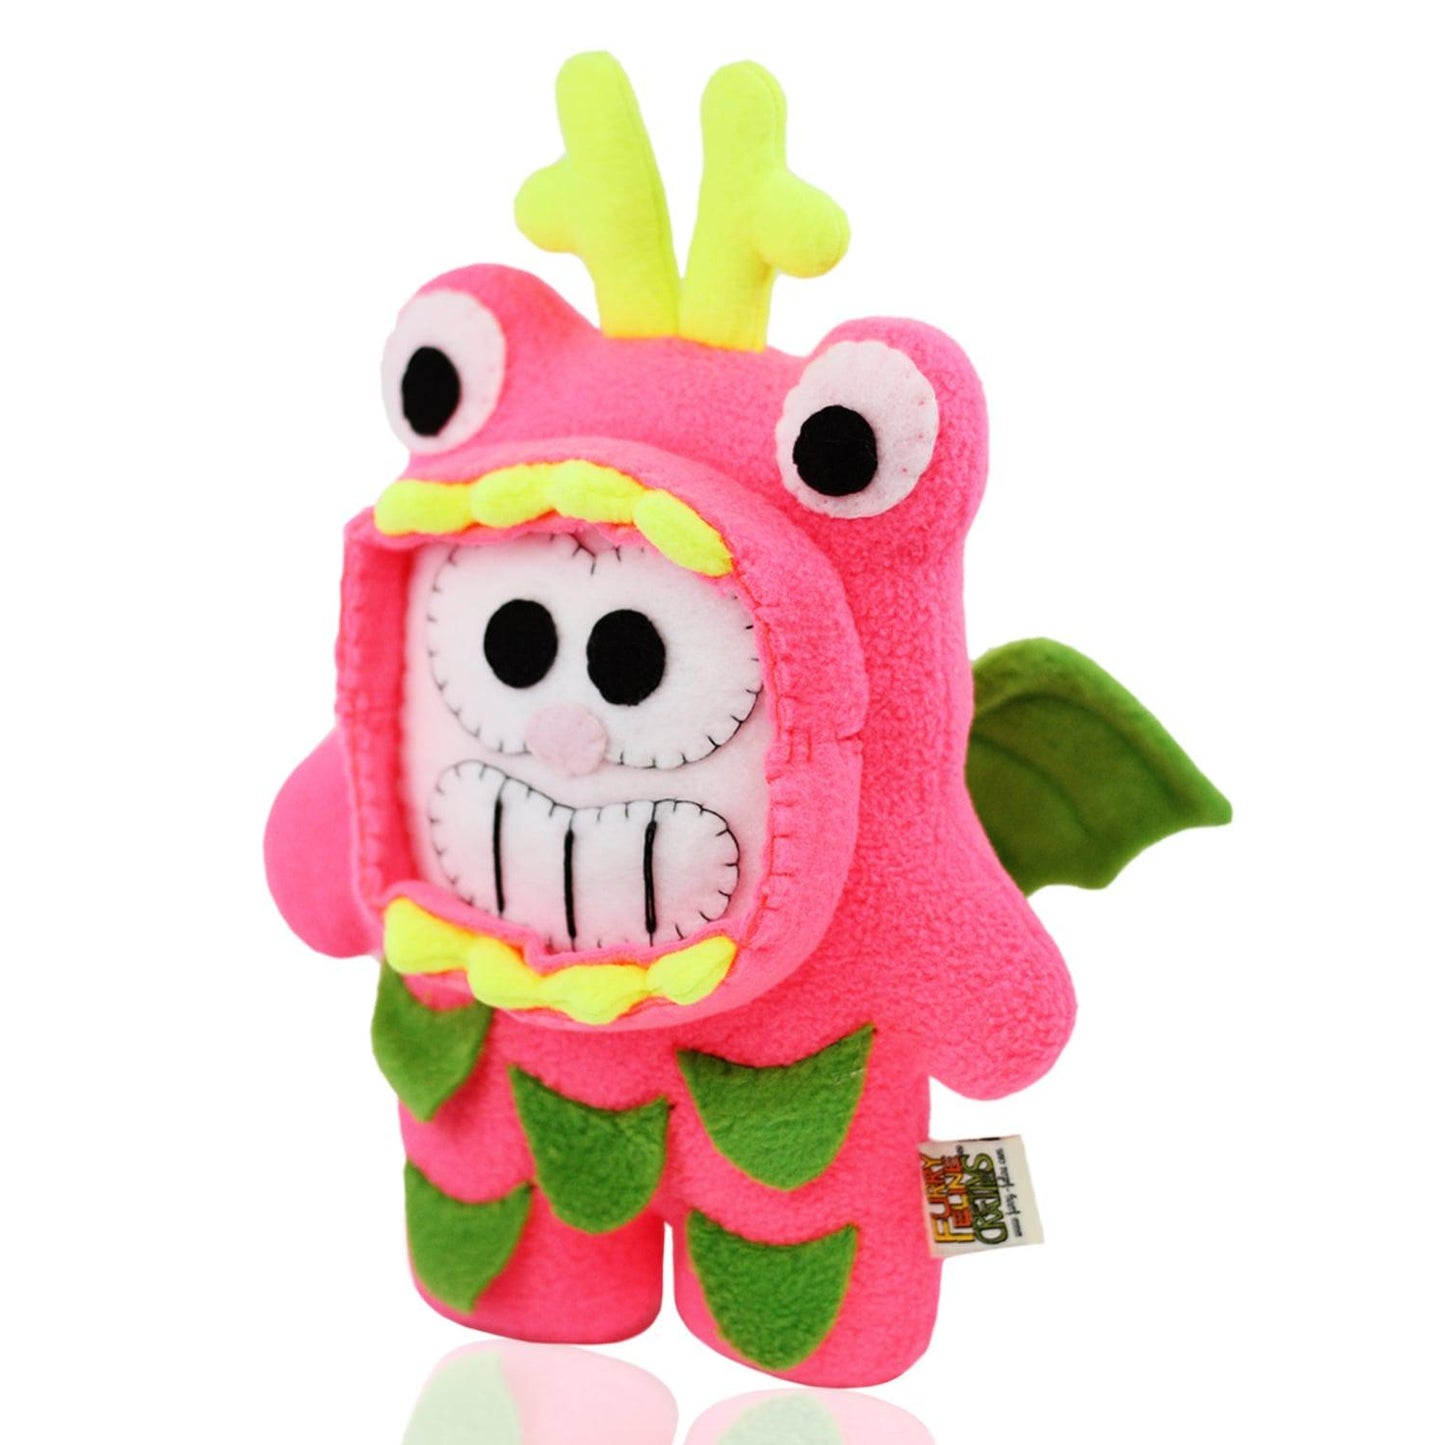 Double Dragonfruit Handmade Plushies Neon Edition (SDCC EXCLUSIVE)